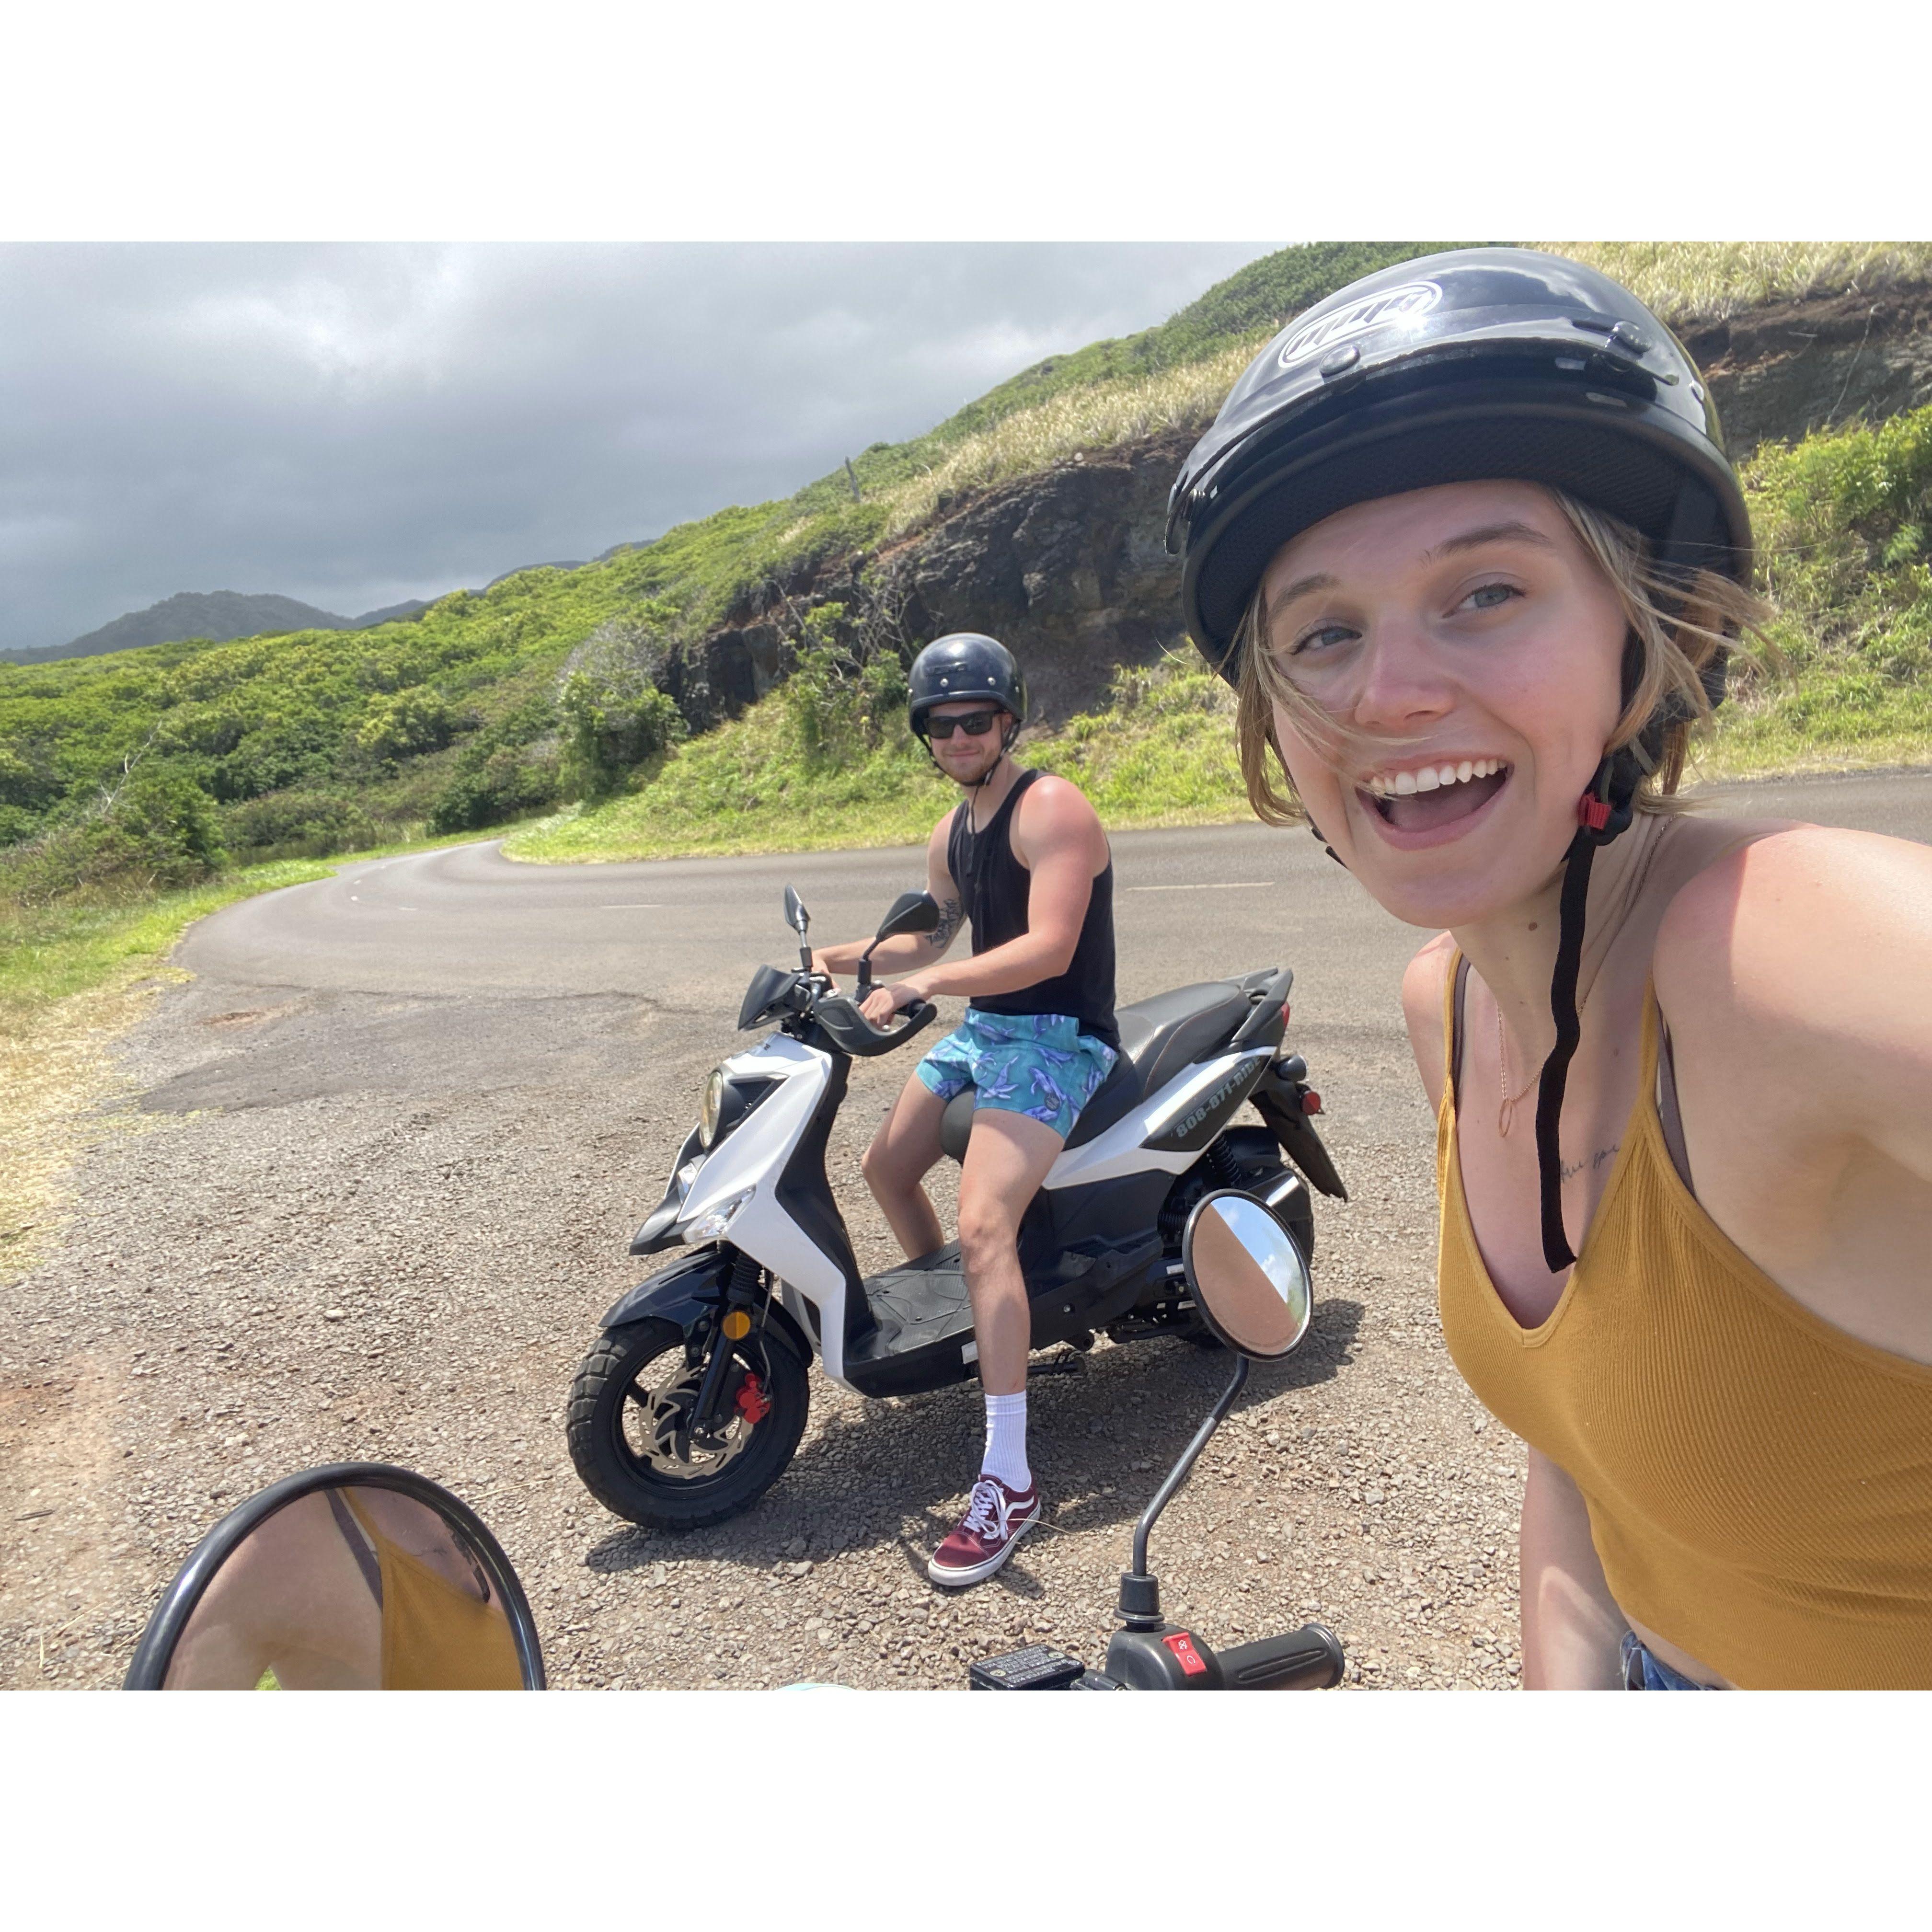 Moped-ing around the island of Maui in Hawaii!